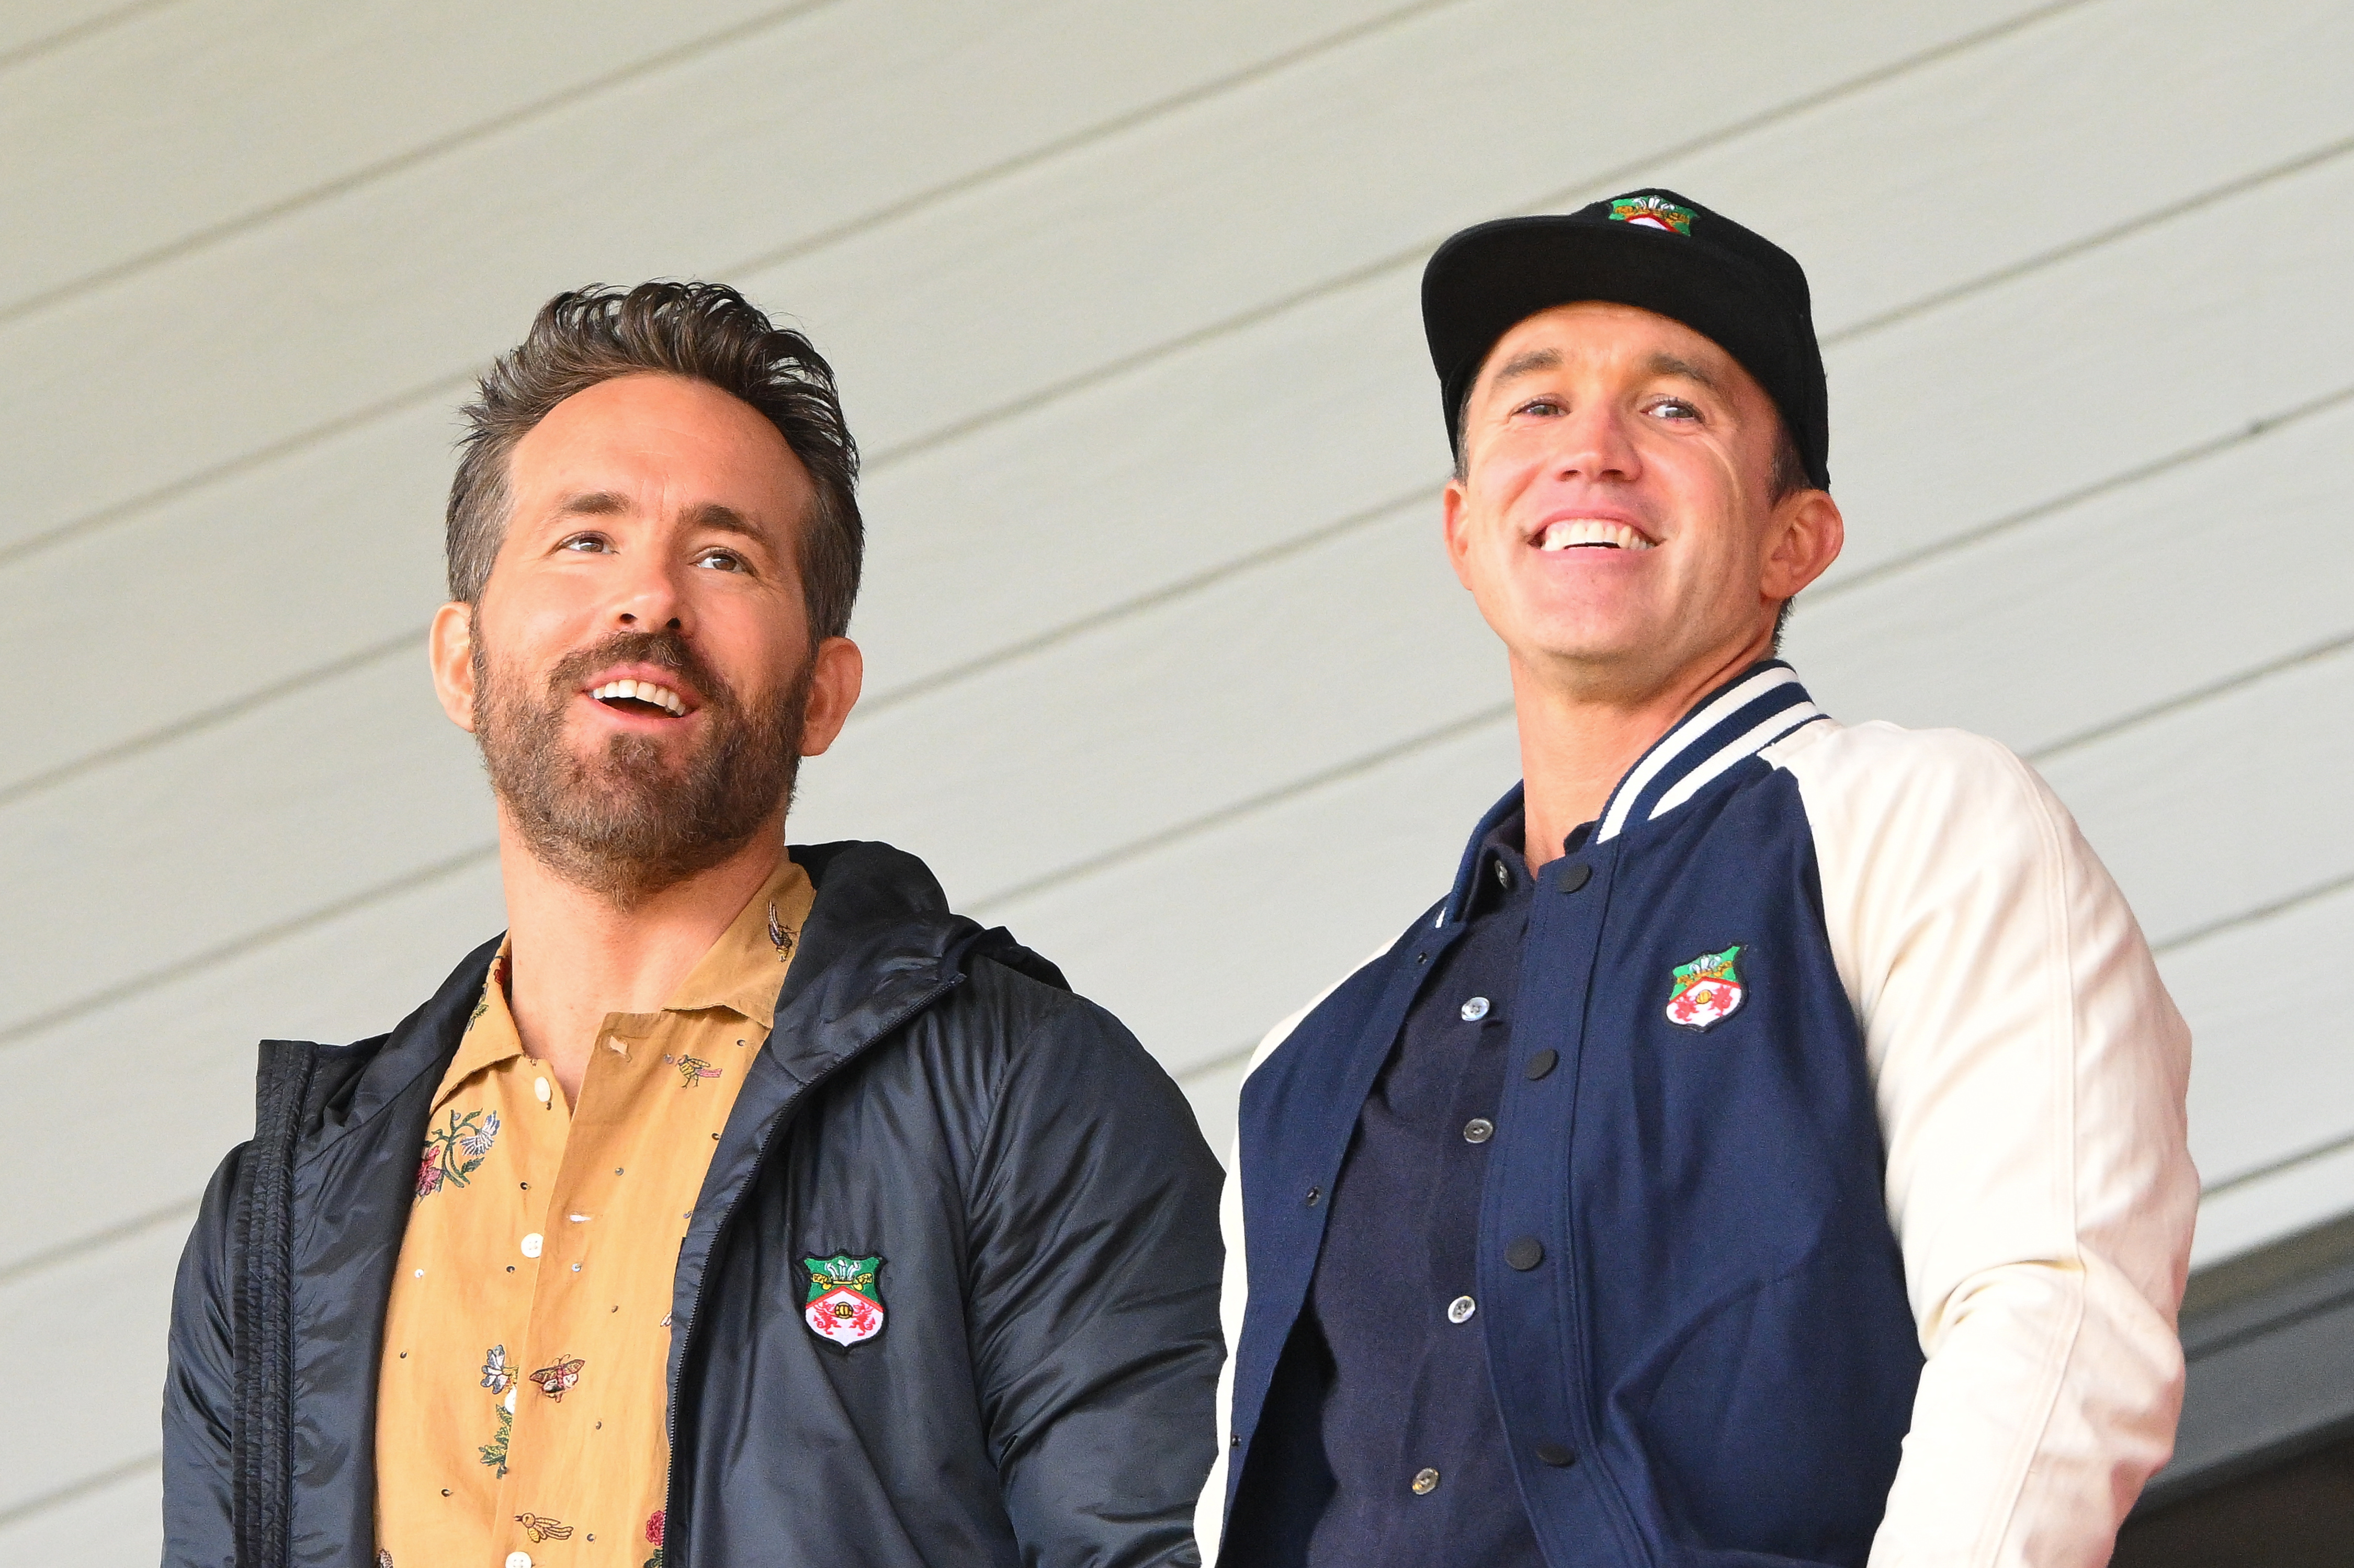 Rob pictured with actor Ryan Reynolds at an event in April 2023